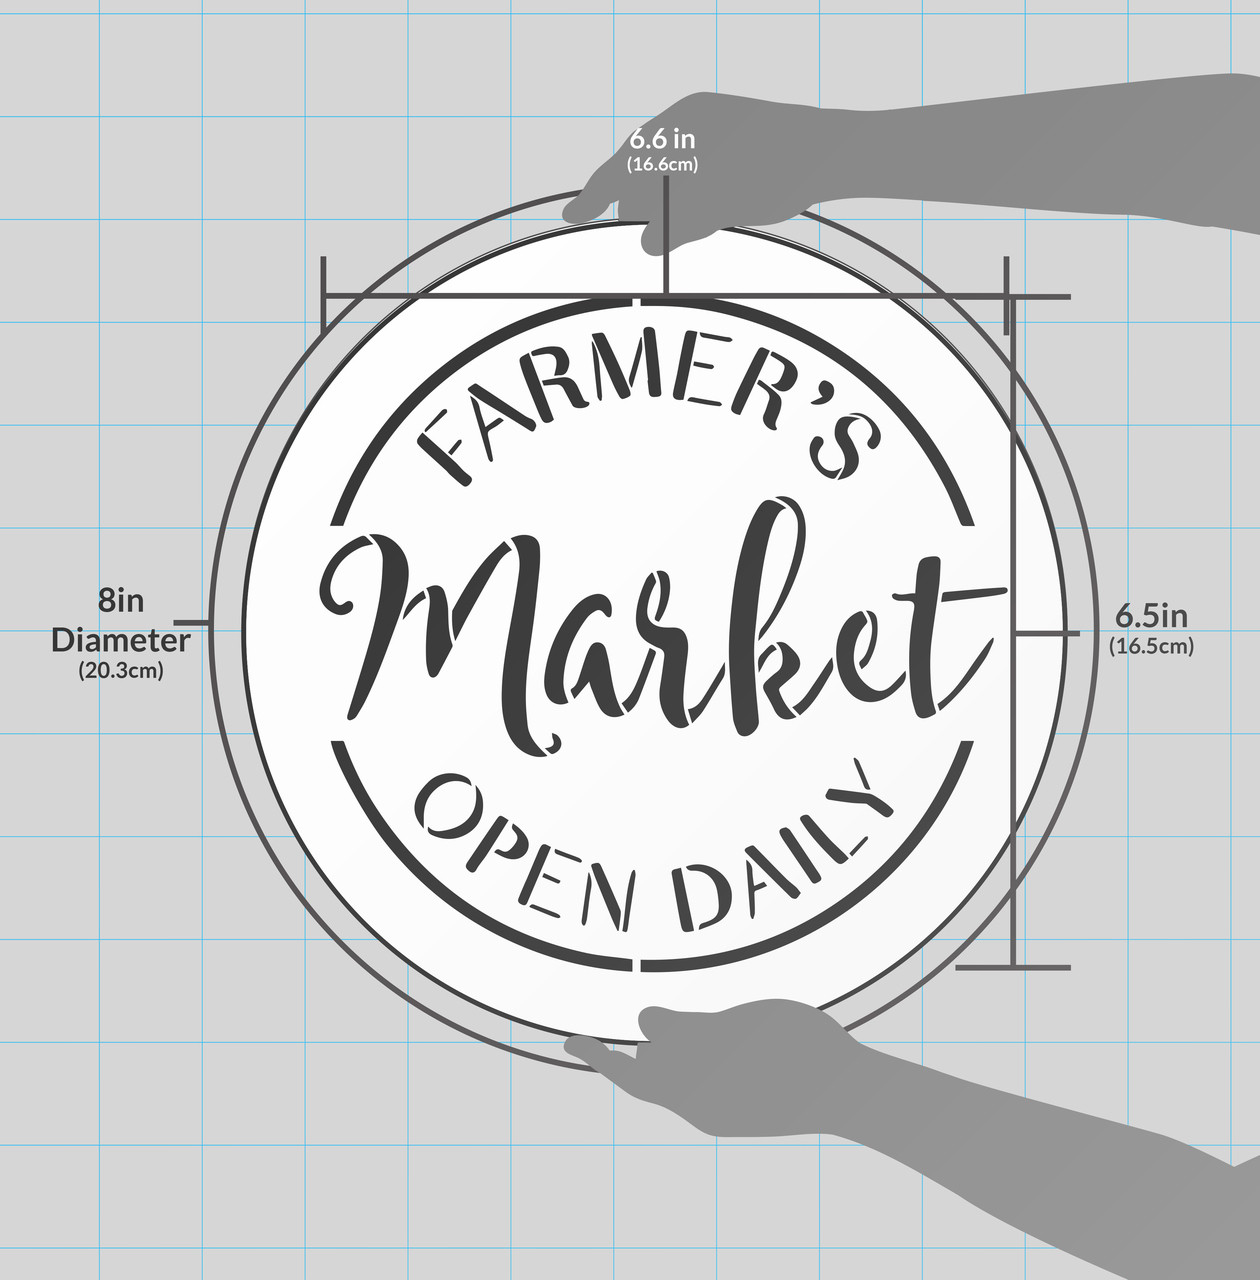 Farmer's Market Open Daily Stencil by StudioR12 - Country Word Art - 18" Round - STCL2456_4